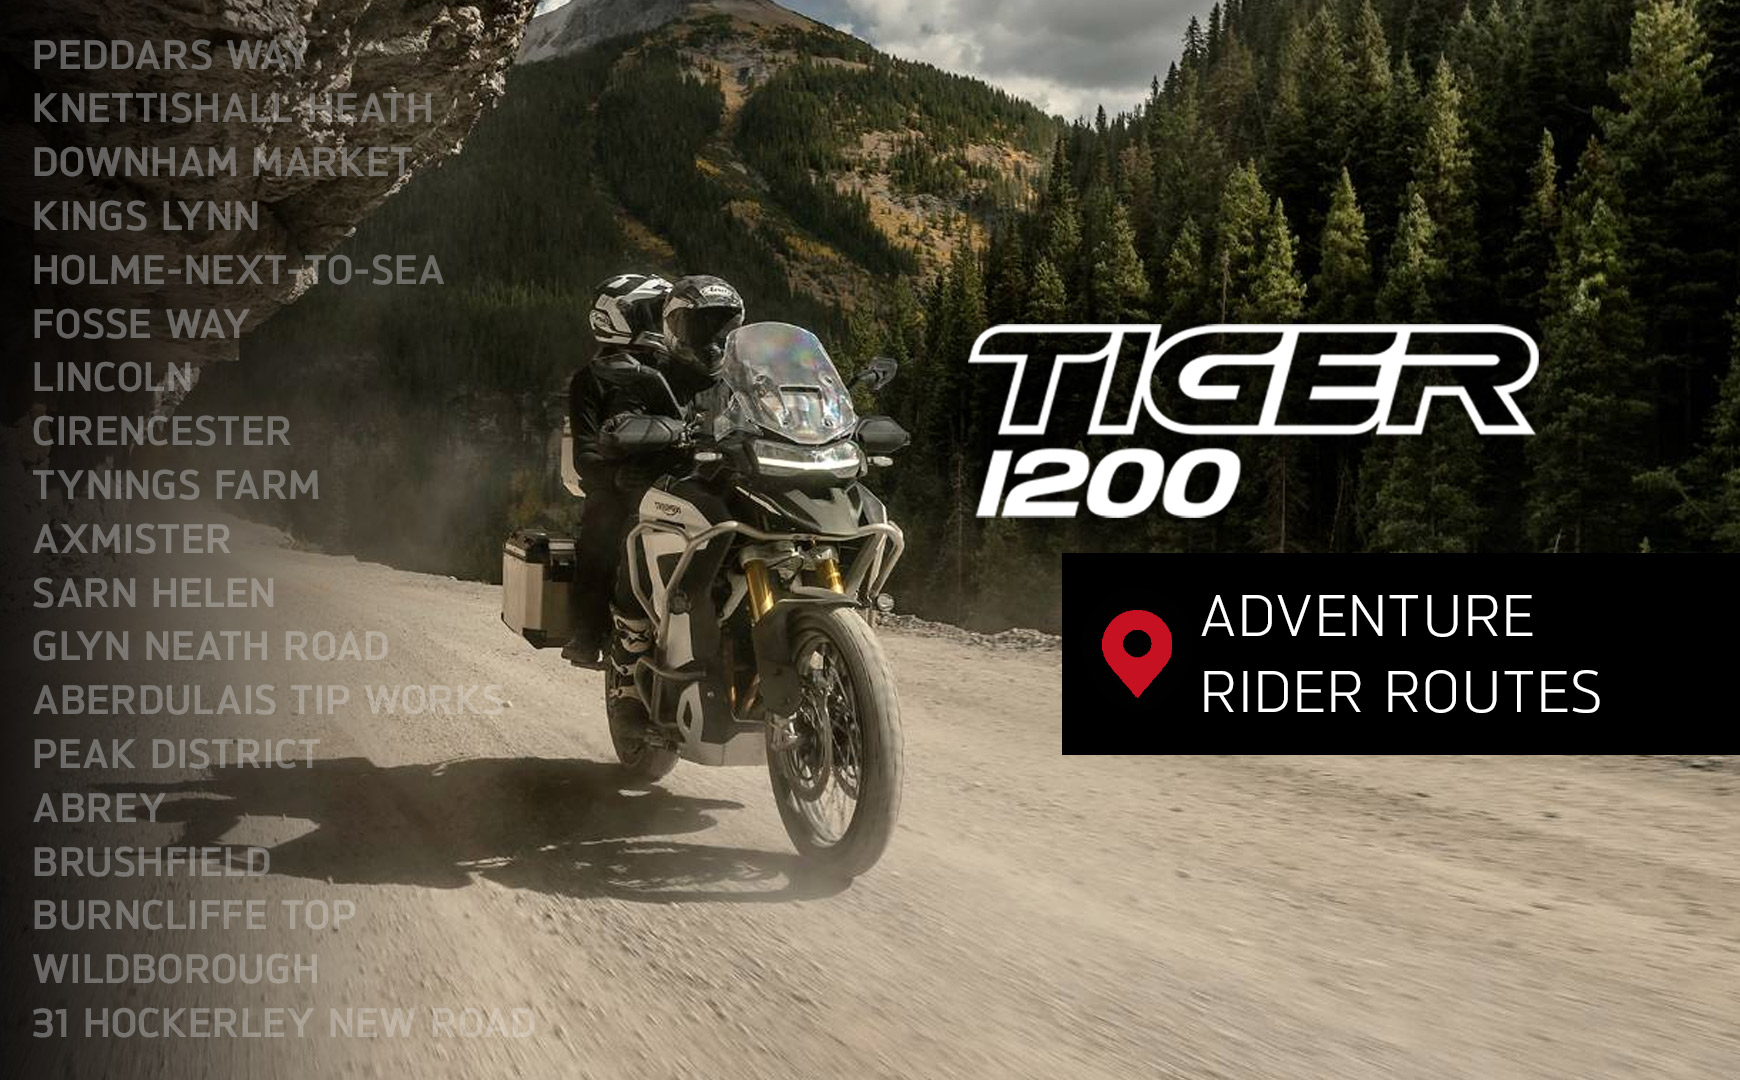 The Tiger 1200 - Rider Routes